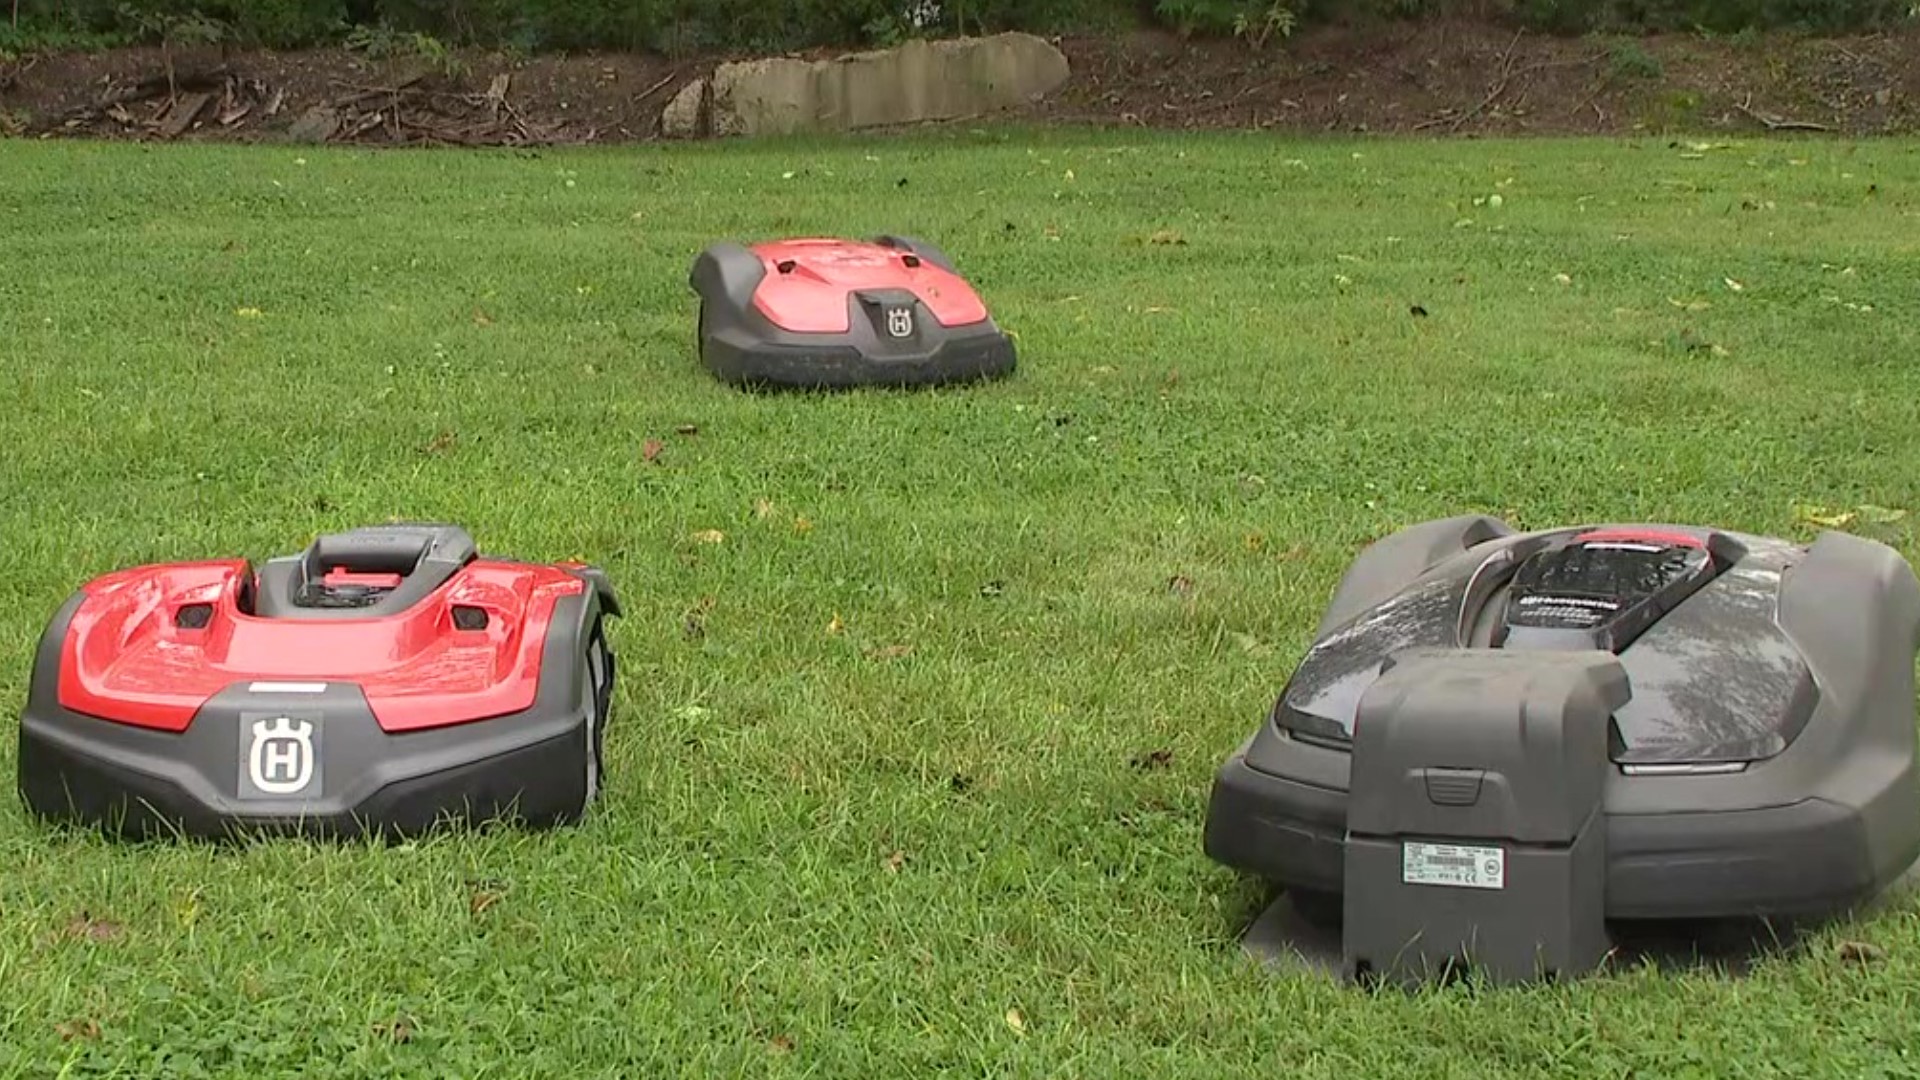 A man from Danville is using robots for lawn care.